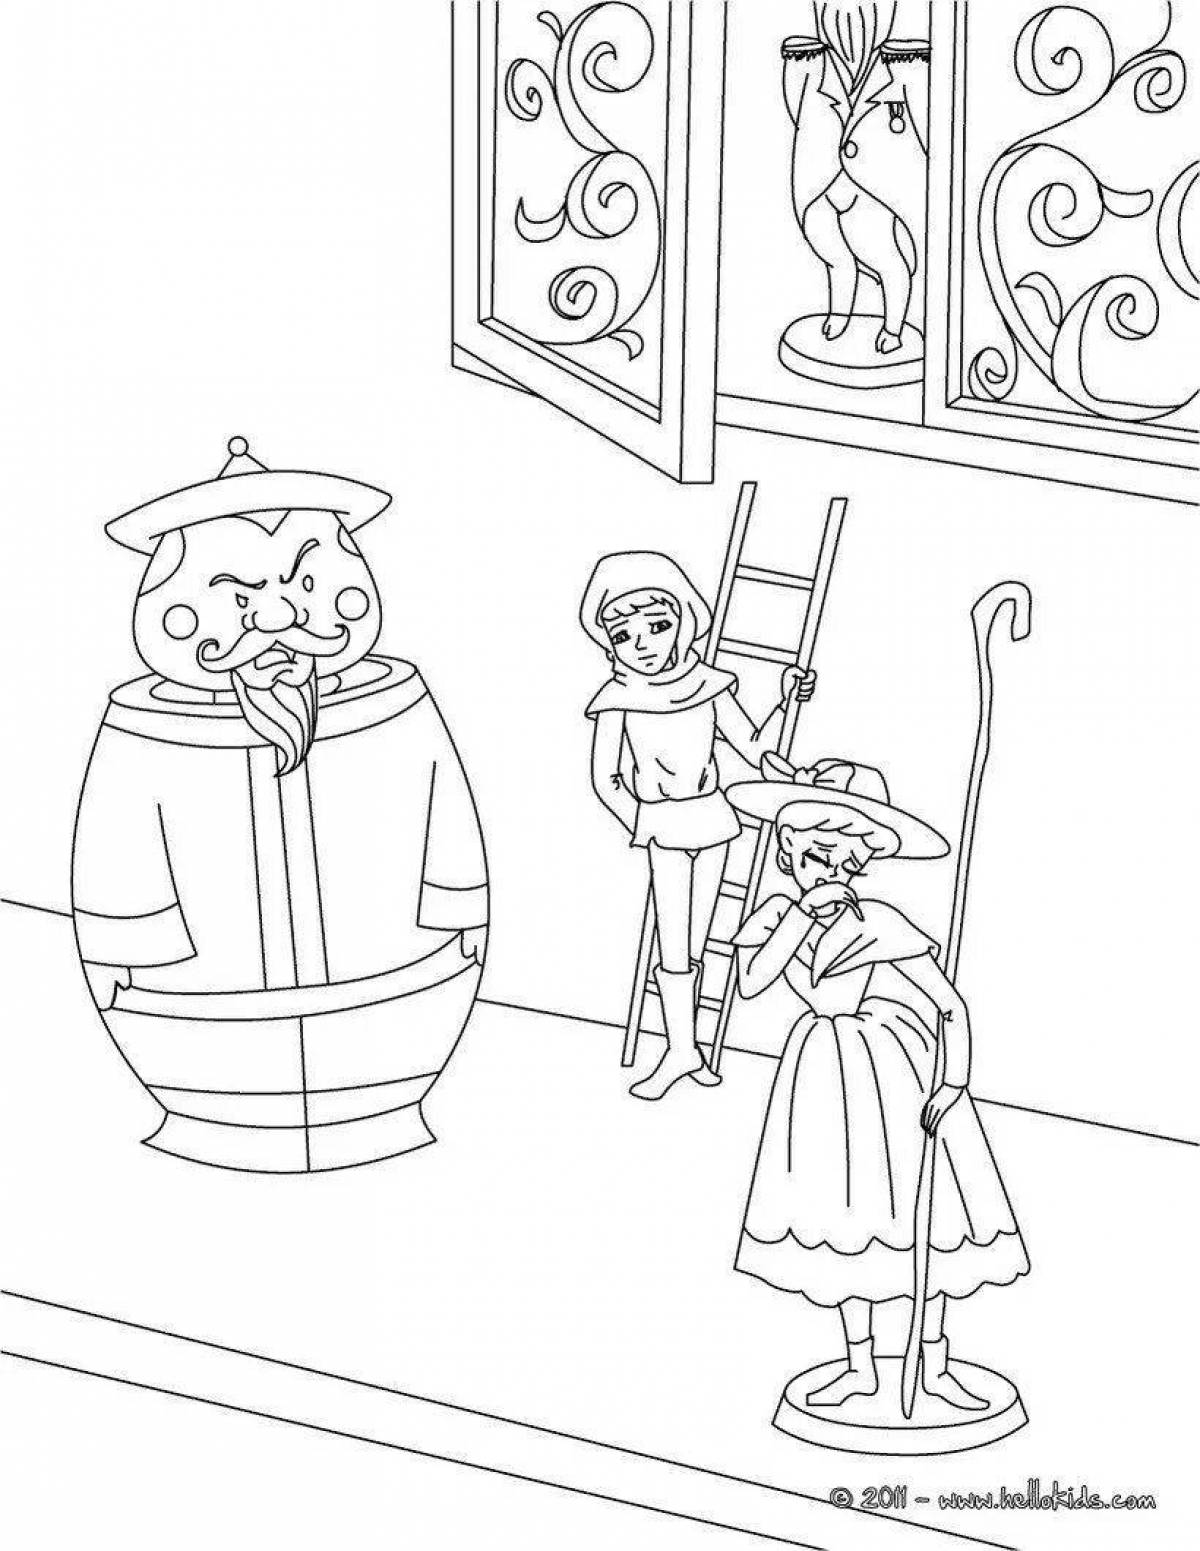 Splendorous tin soldier coloring page